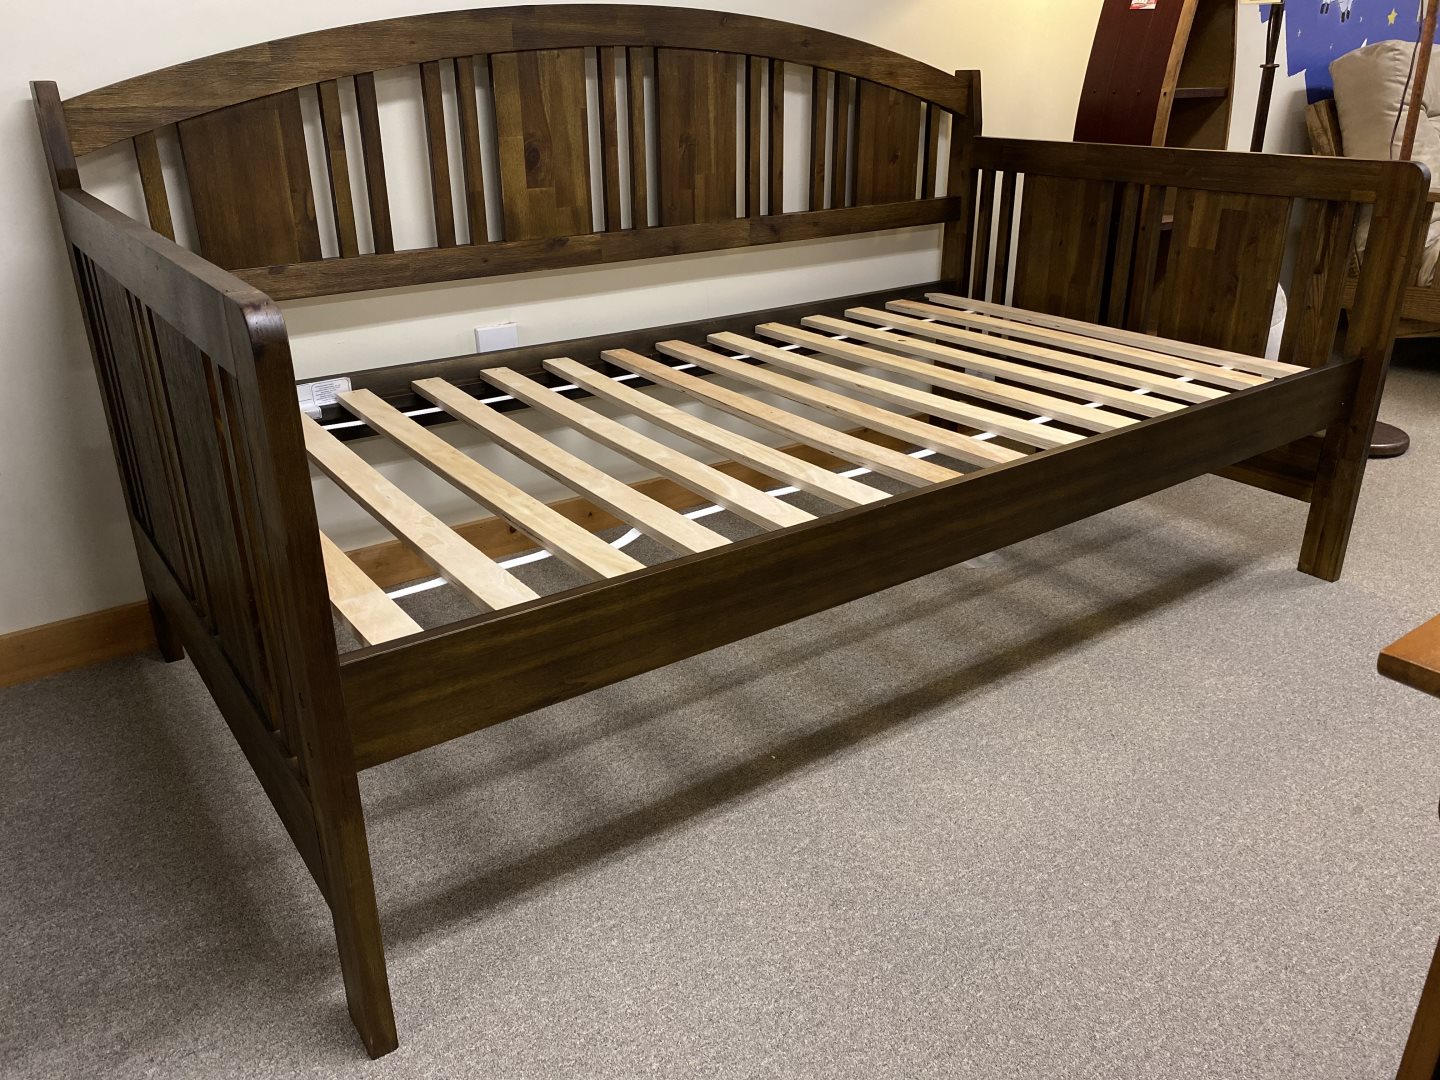 Hillsdale Dana Daybed